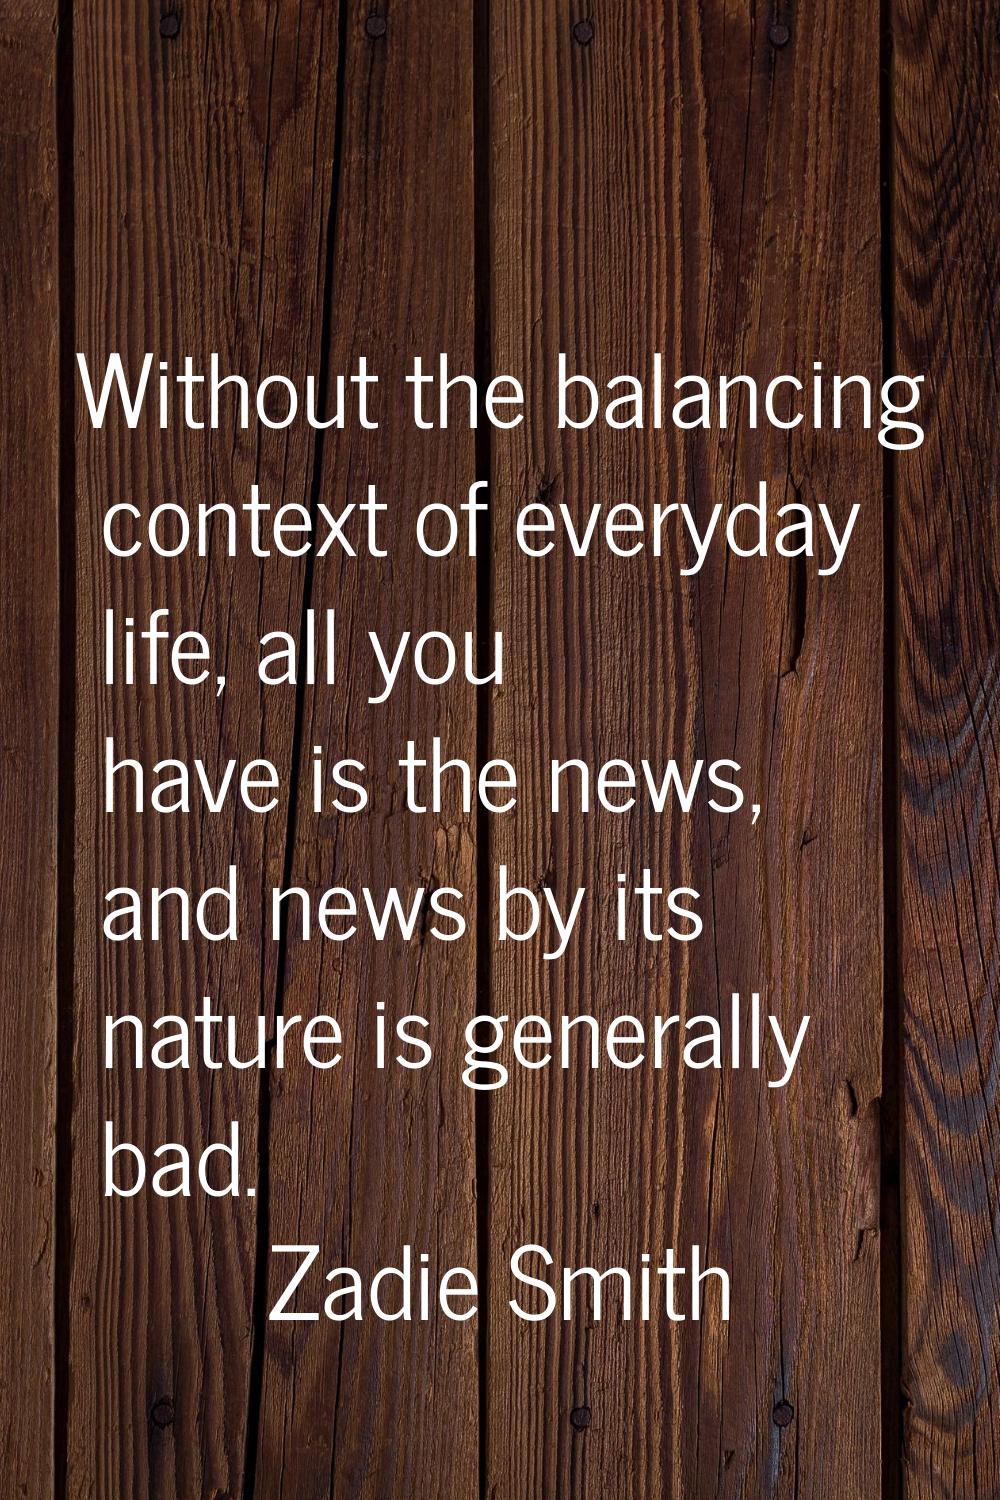 Without the balancing context of everyday life, all you have is the news, and news by its nature is